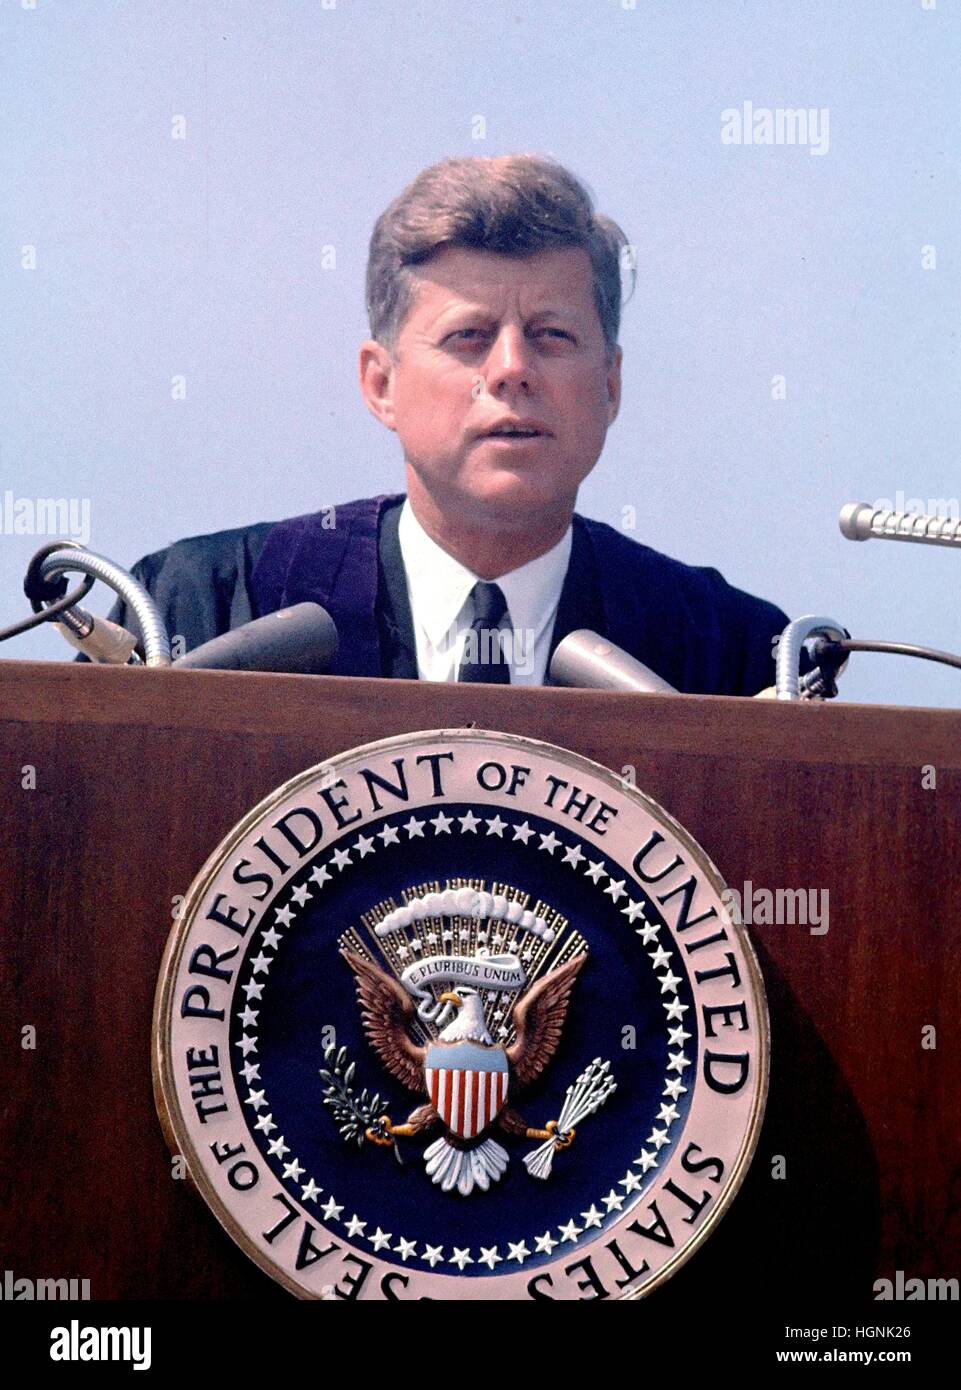 United States President John F. Kennedy speaks at the American University commencement in Washington, D.C. on June 10, 1963. This speech is known as Kennedy's 'Pax Americana' speech, where he outlined his vision for world peace. Stock Photo